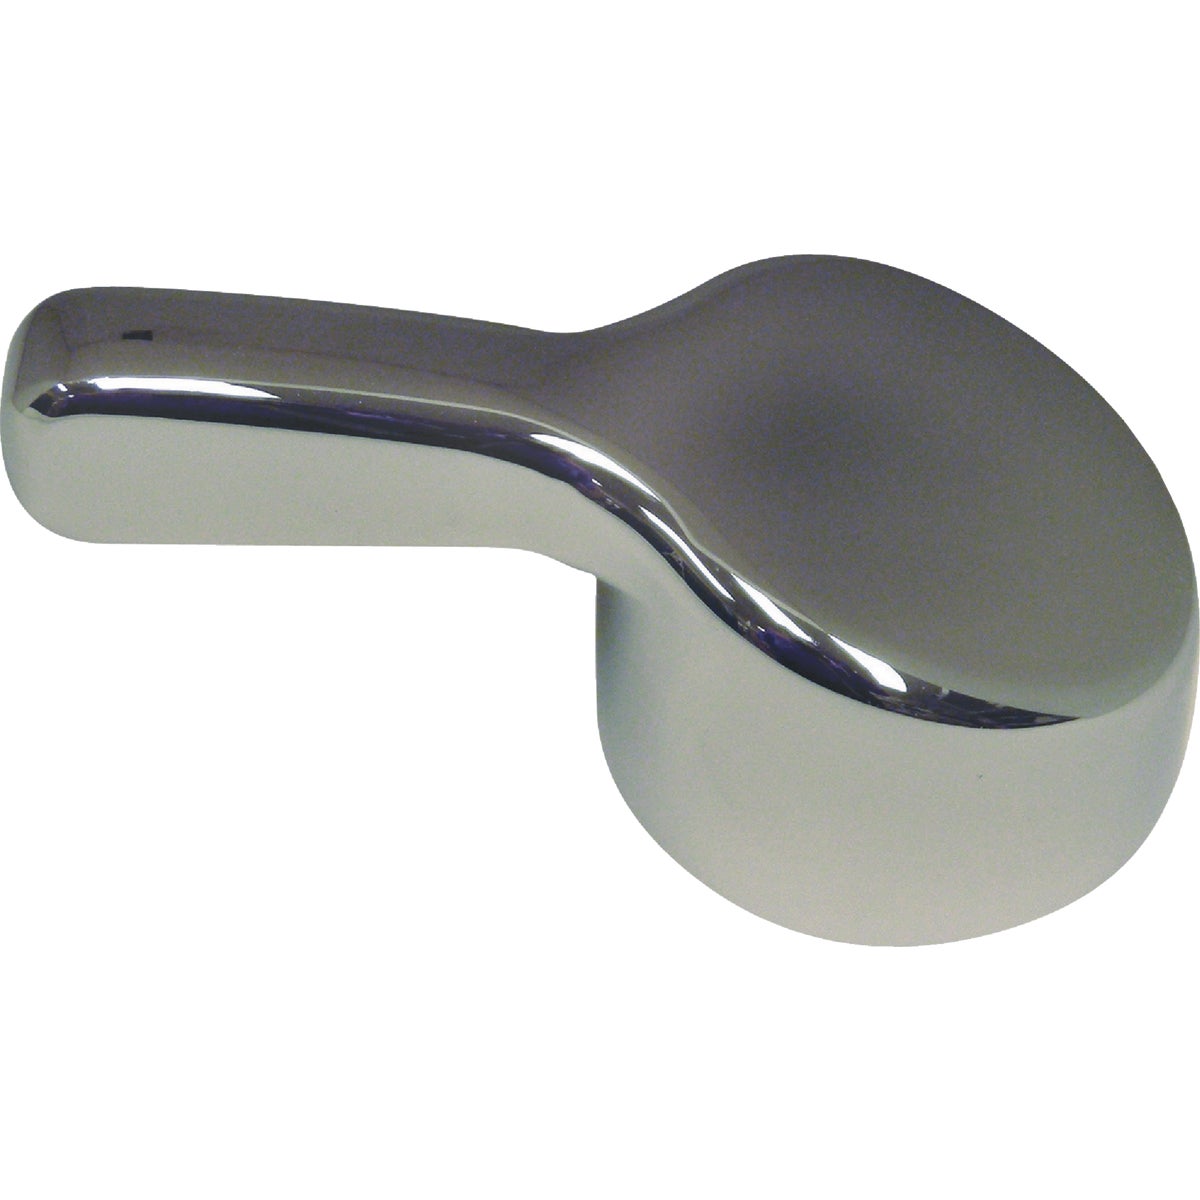 Item 453057, Metal lever style. Perfect upgrade for existing acrylic handles.